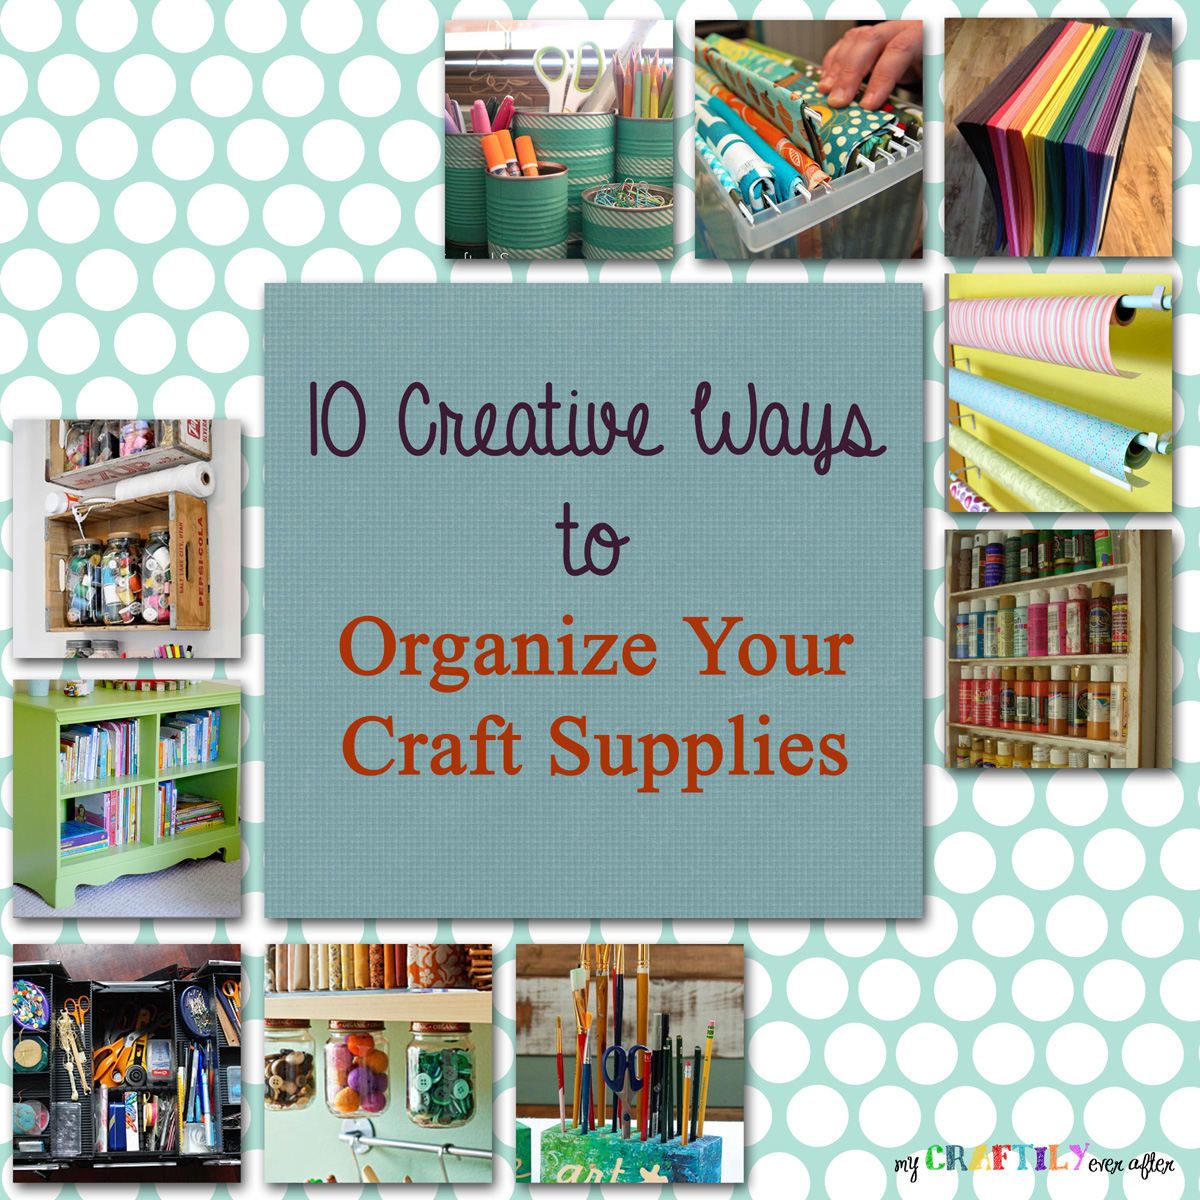 10 Creative Ways to Organize Your Craft Supplies - My Craftily Ever After